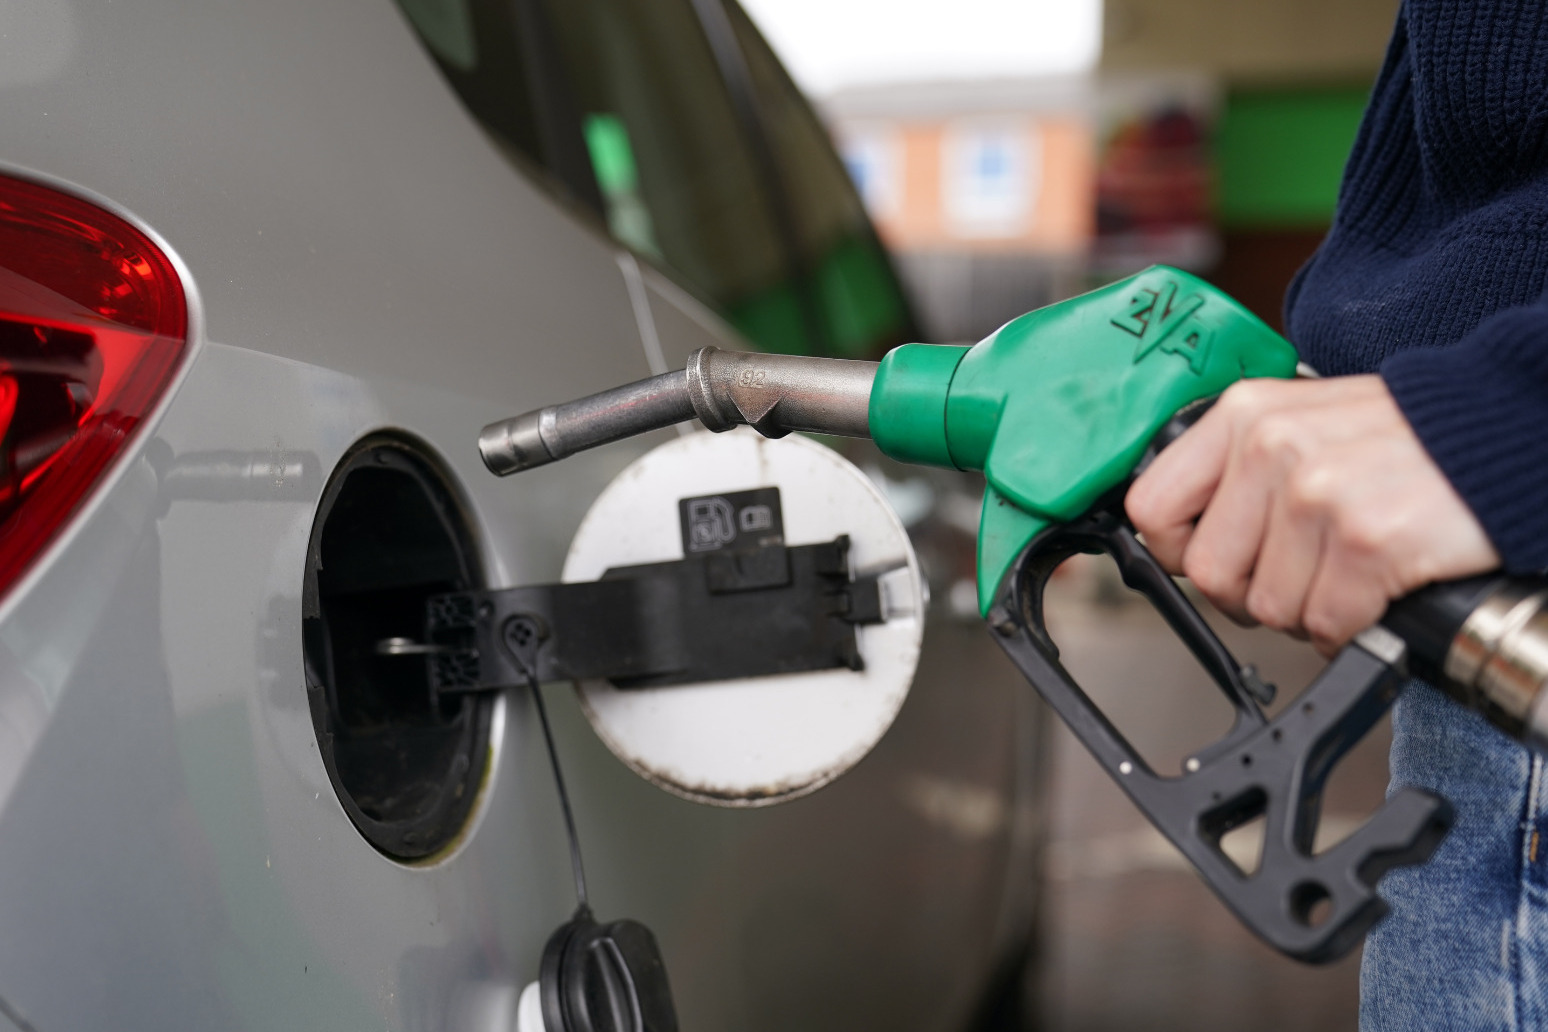 RAC calls for major retailers to cut petrol by 5p a litre 